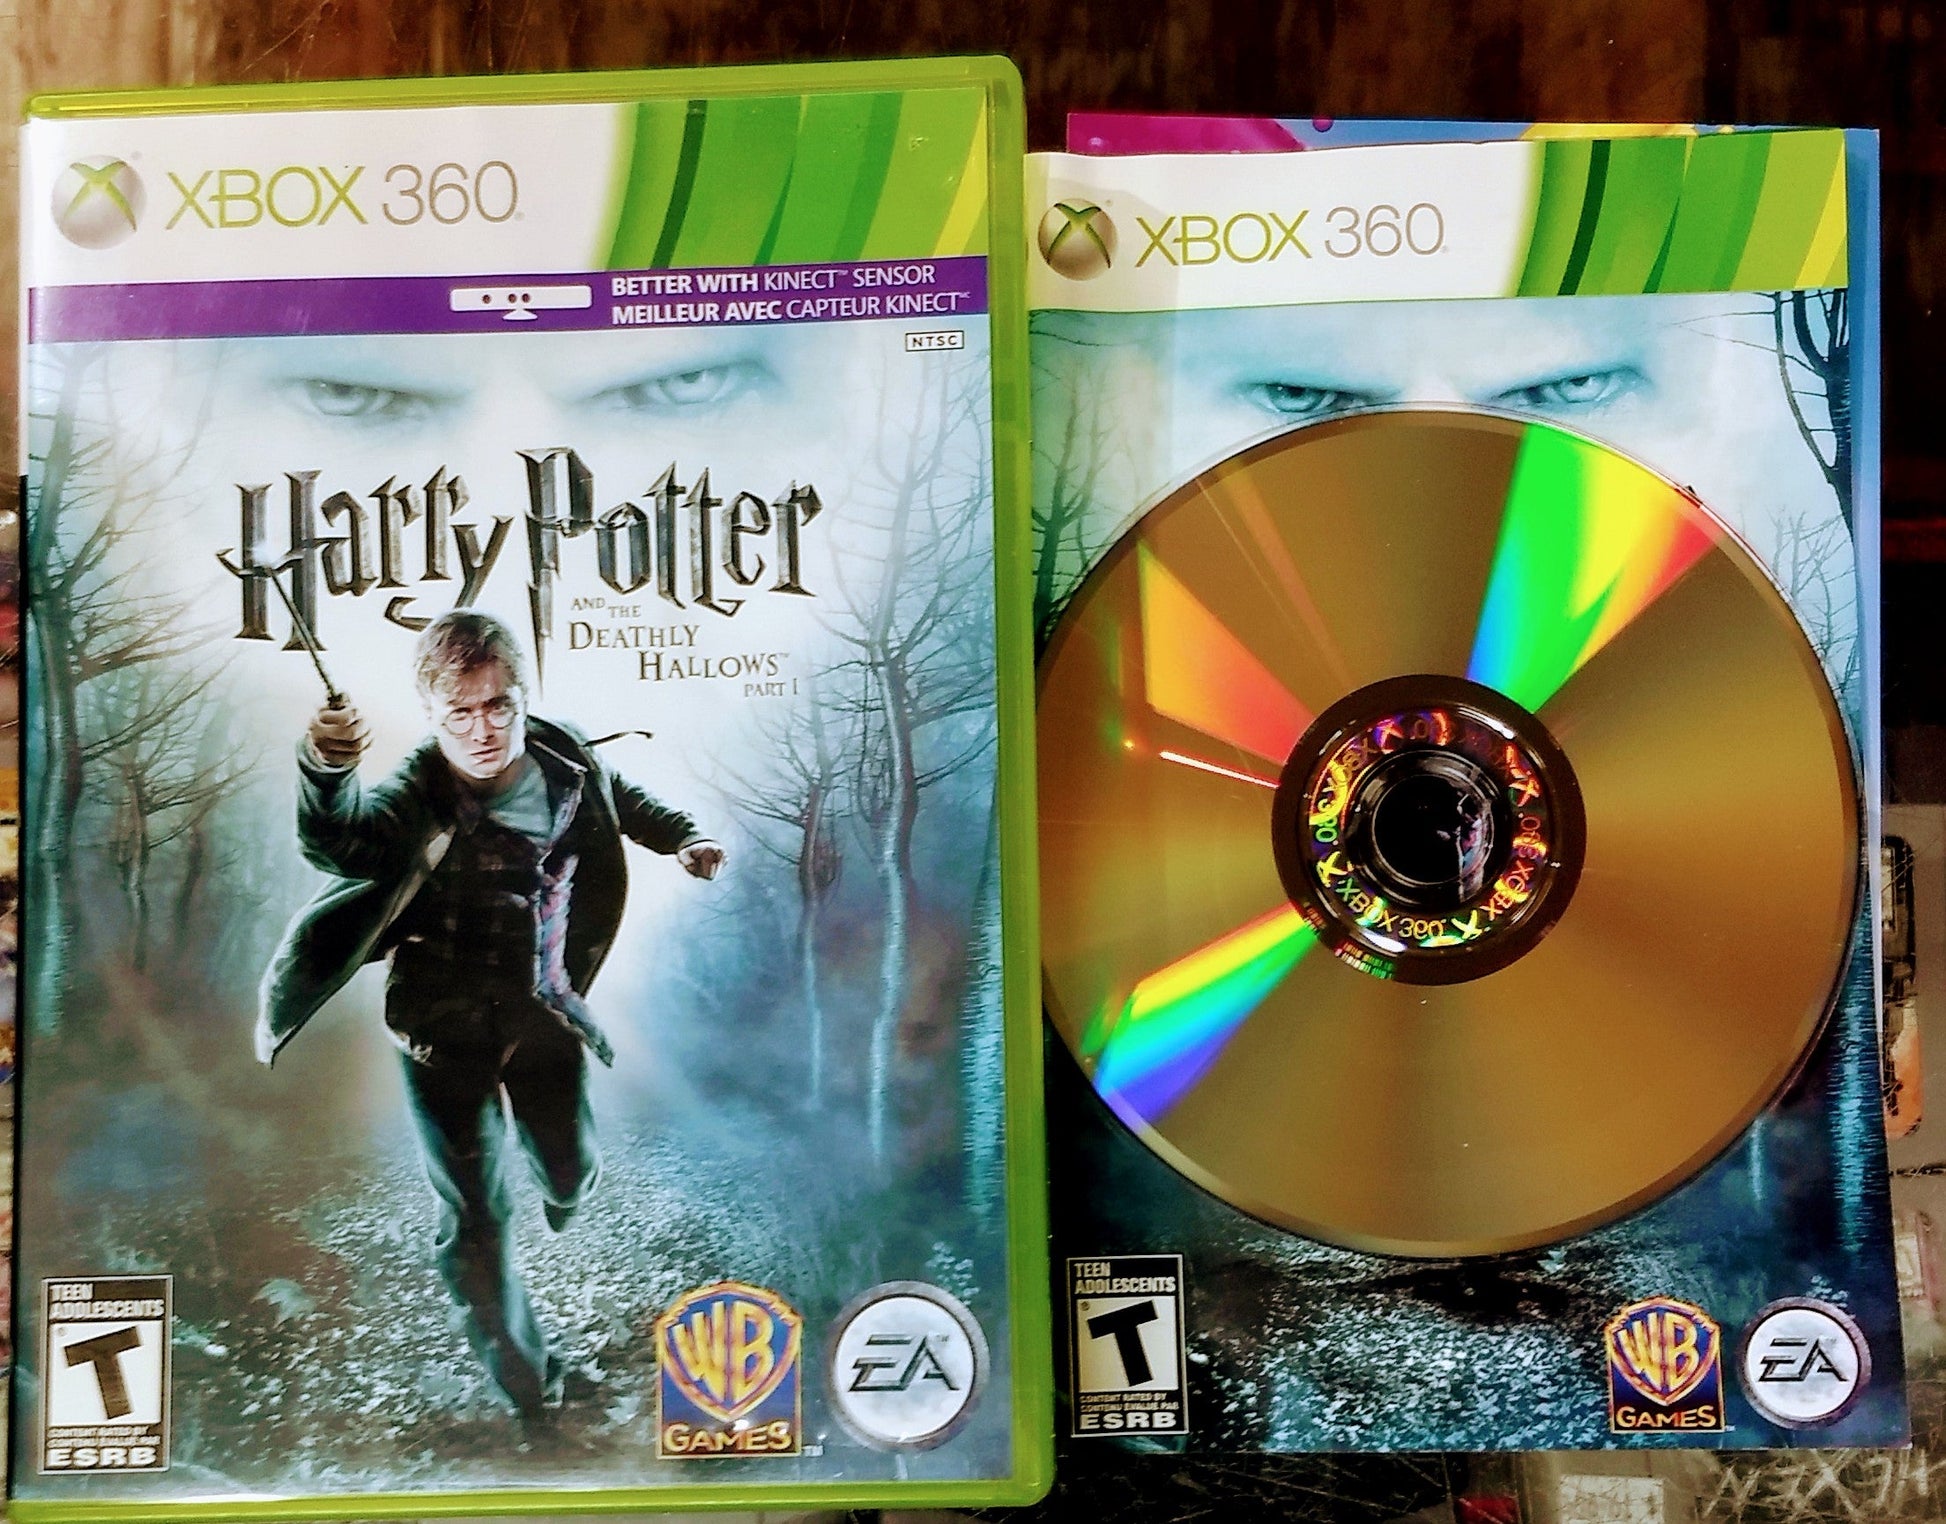 HARRY POTTER AND THE DEATHLY HALLOWS PART 1 (XBOX 360 X360) - jeux video game-x